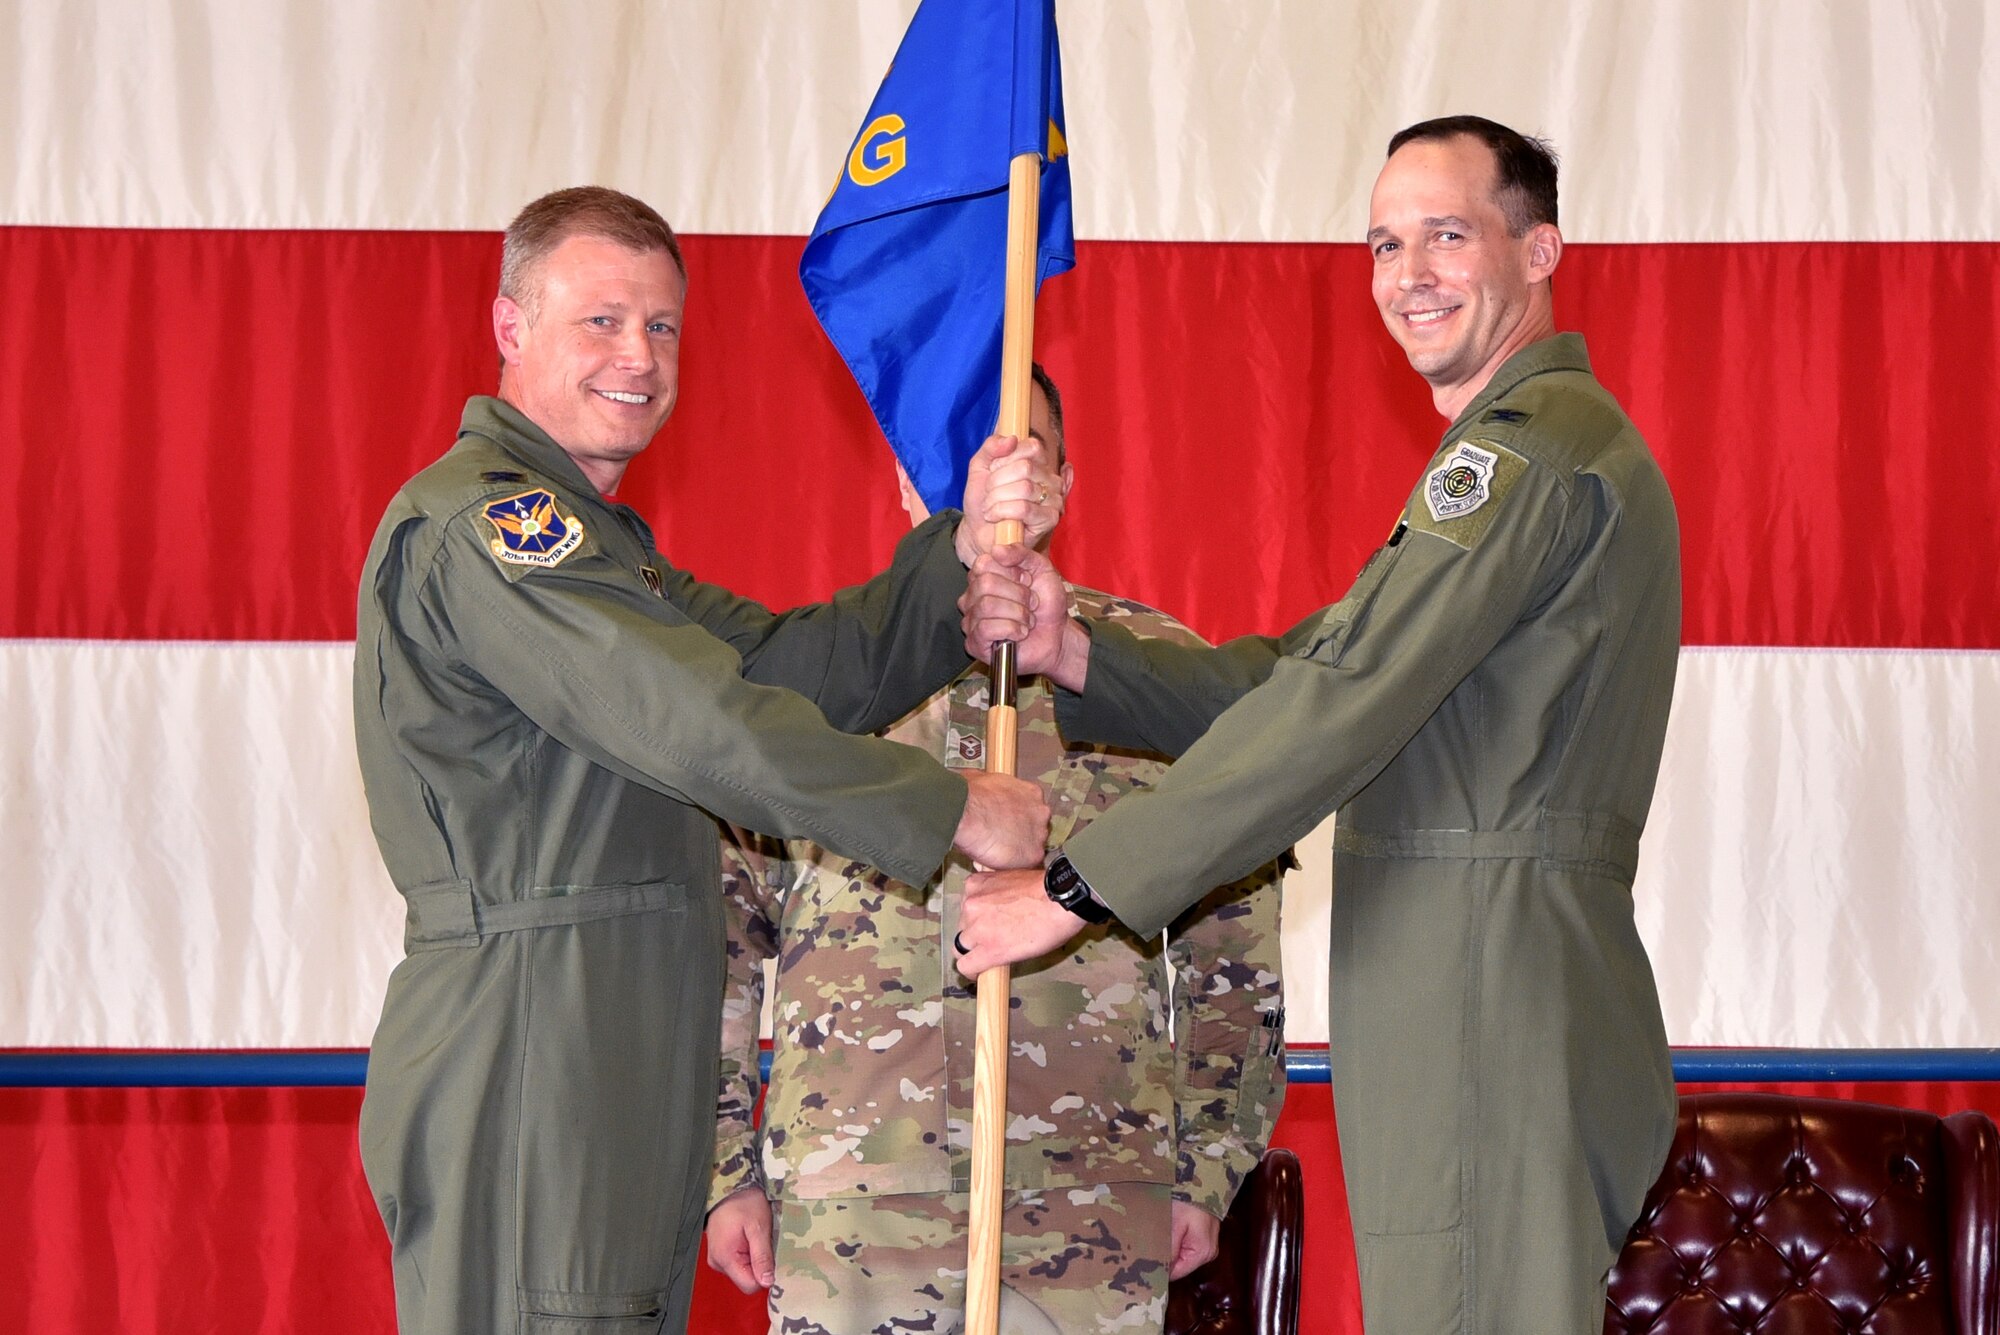 (left) Col. Allen Duckworth, 301st Fighter Wing commander, passes the guideon to Col. Benjamin Harrison, 301st Operations Group commander, June 6, 2021, at U.S. Naval Air Station Joint Reserve Base Fort Worth, Texas. The change of command ceremony is a time honored military tradition that signifies the transfer of authority from the out going commander to the new commander. (U.S. Air Force photo by Staff Sgt. Randall Moose)